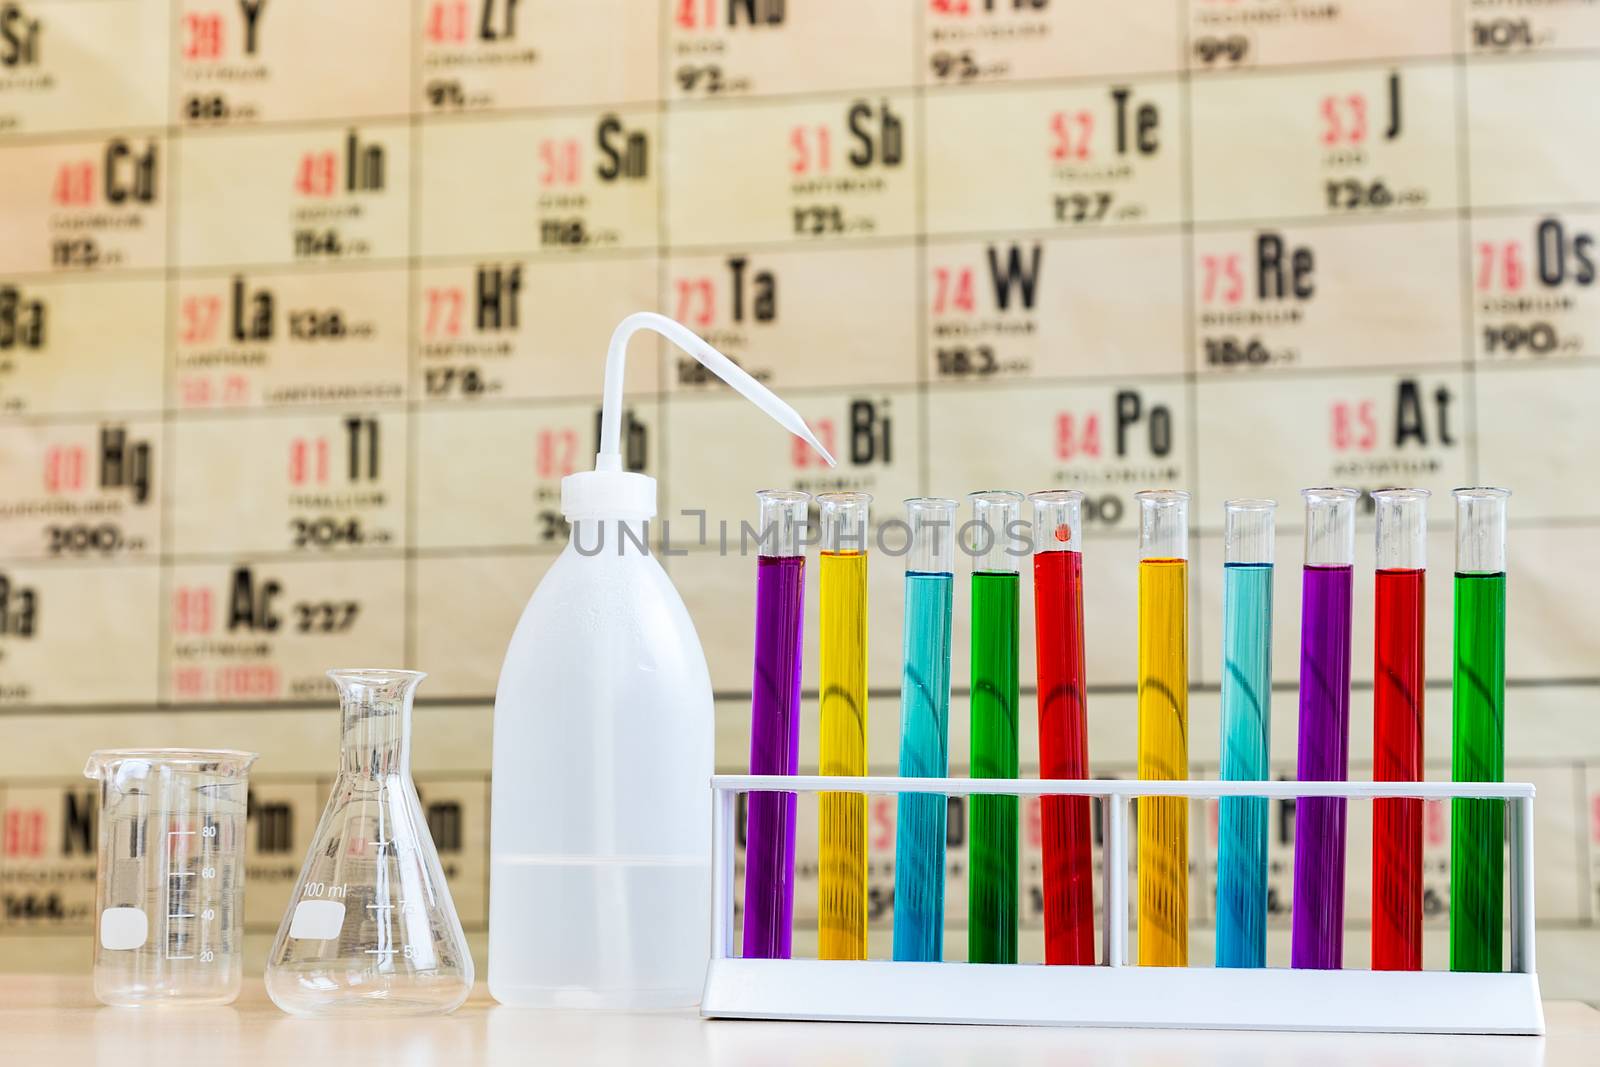 Chemistry with colored test tubes and glass in front of wallchart showing periodic table